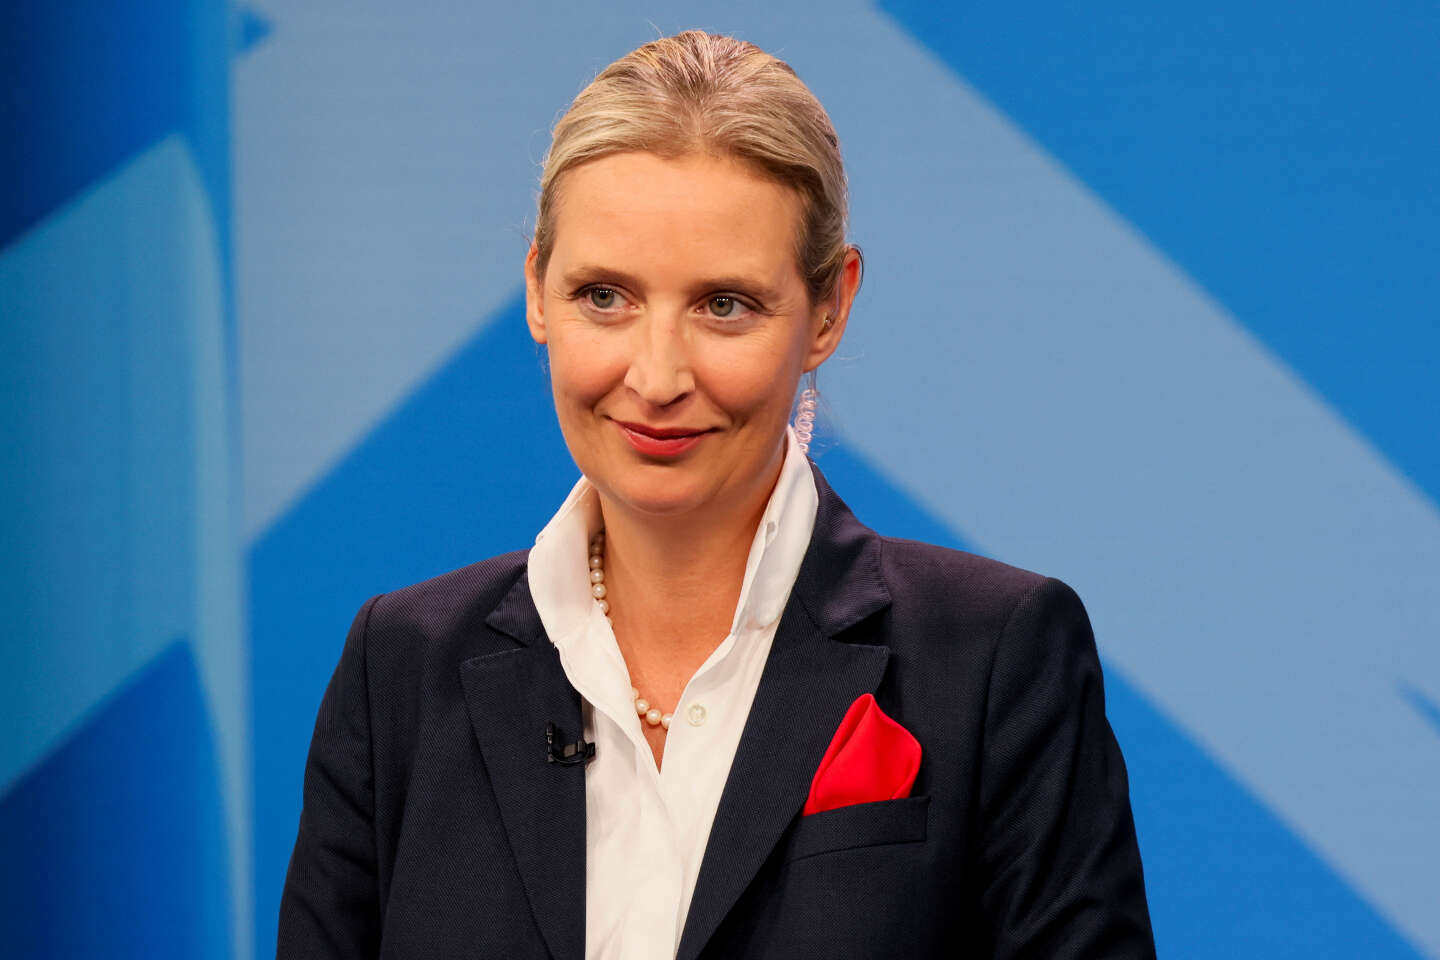 The far-right AfD party is making headway, a significant setback for Olaf Scholes’ SDP